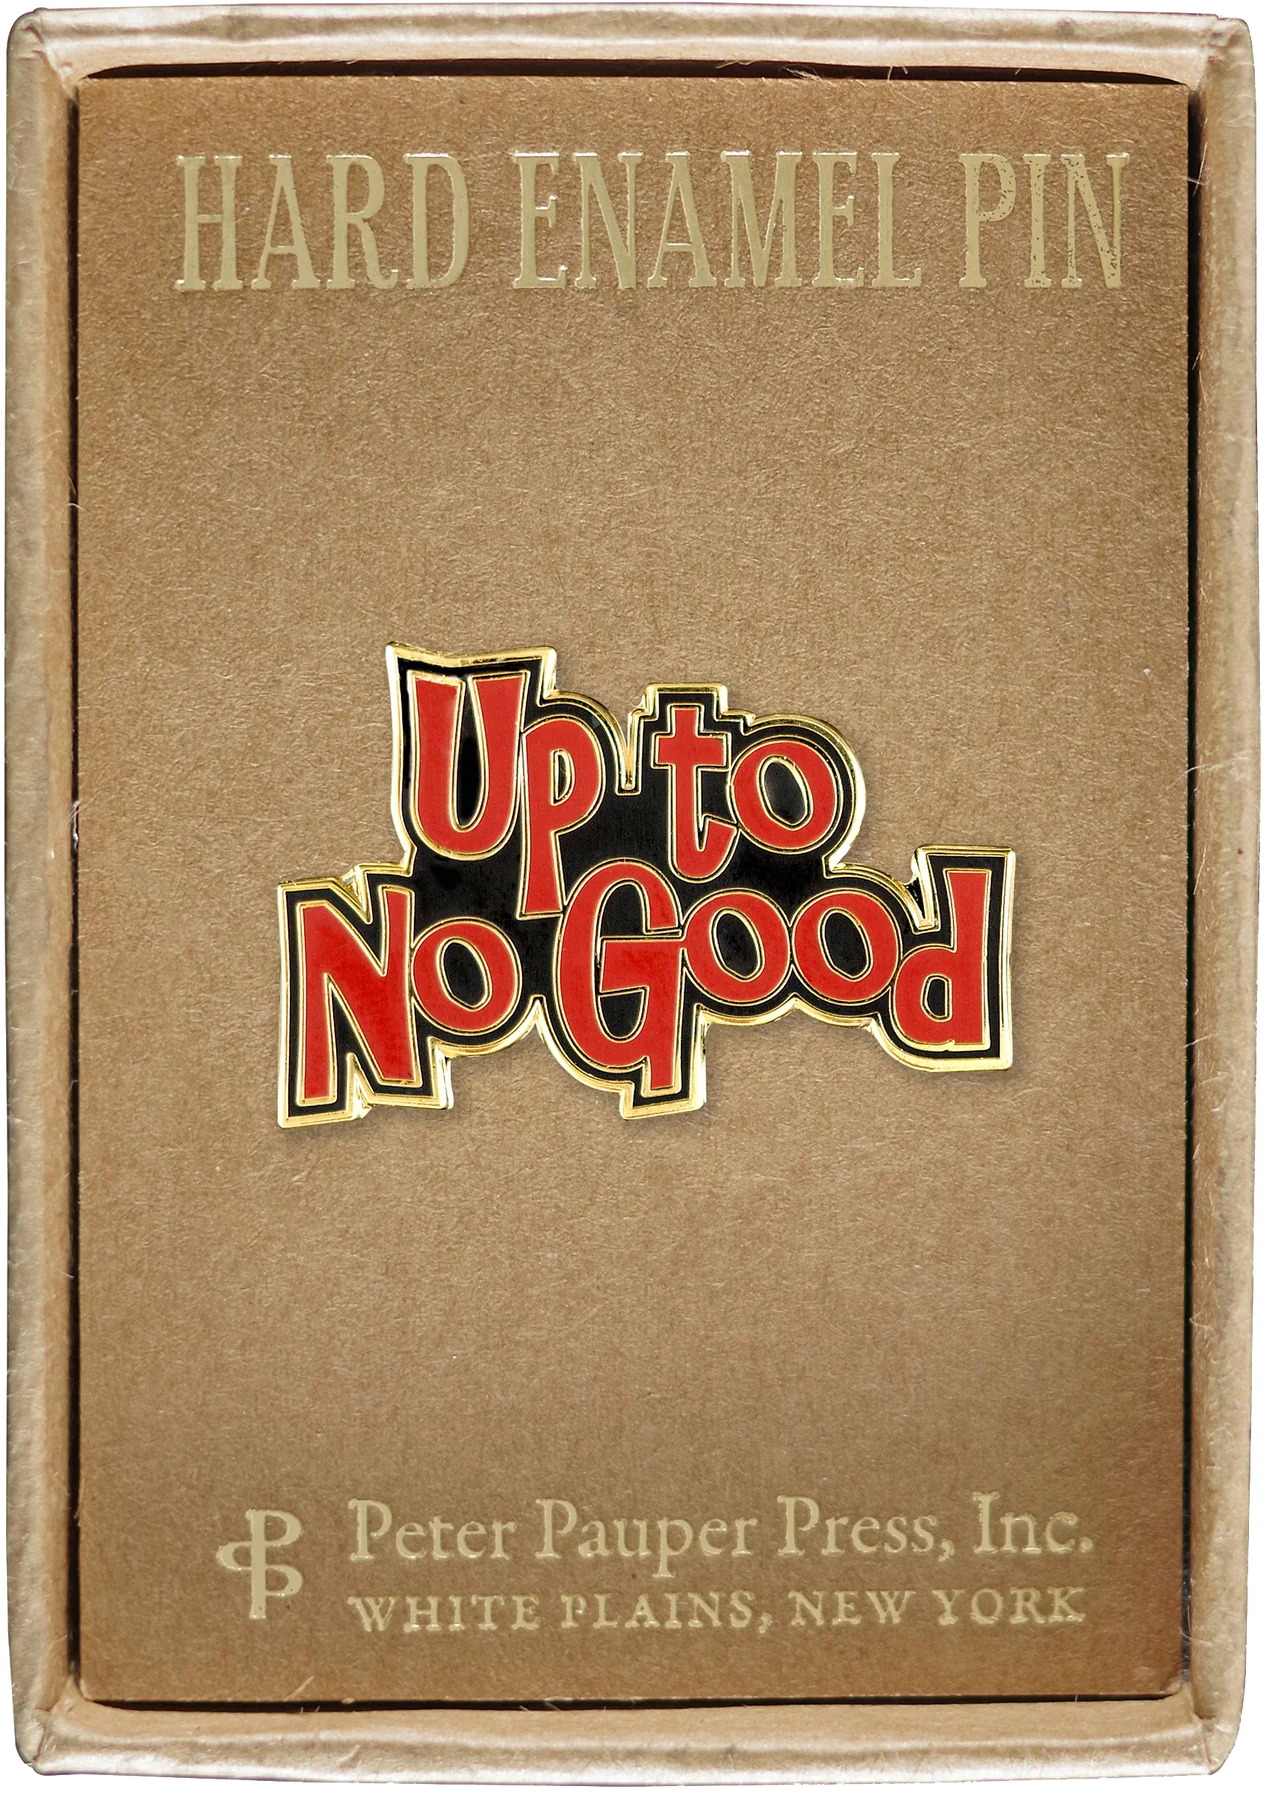 Red cartoon text with a black outline that says 'up to no good' attached to a box that says hard enamel pin